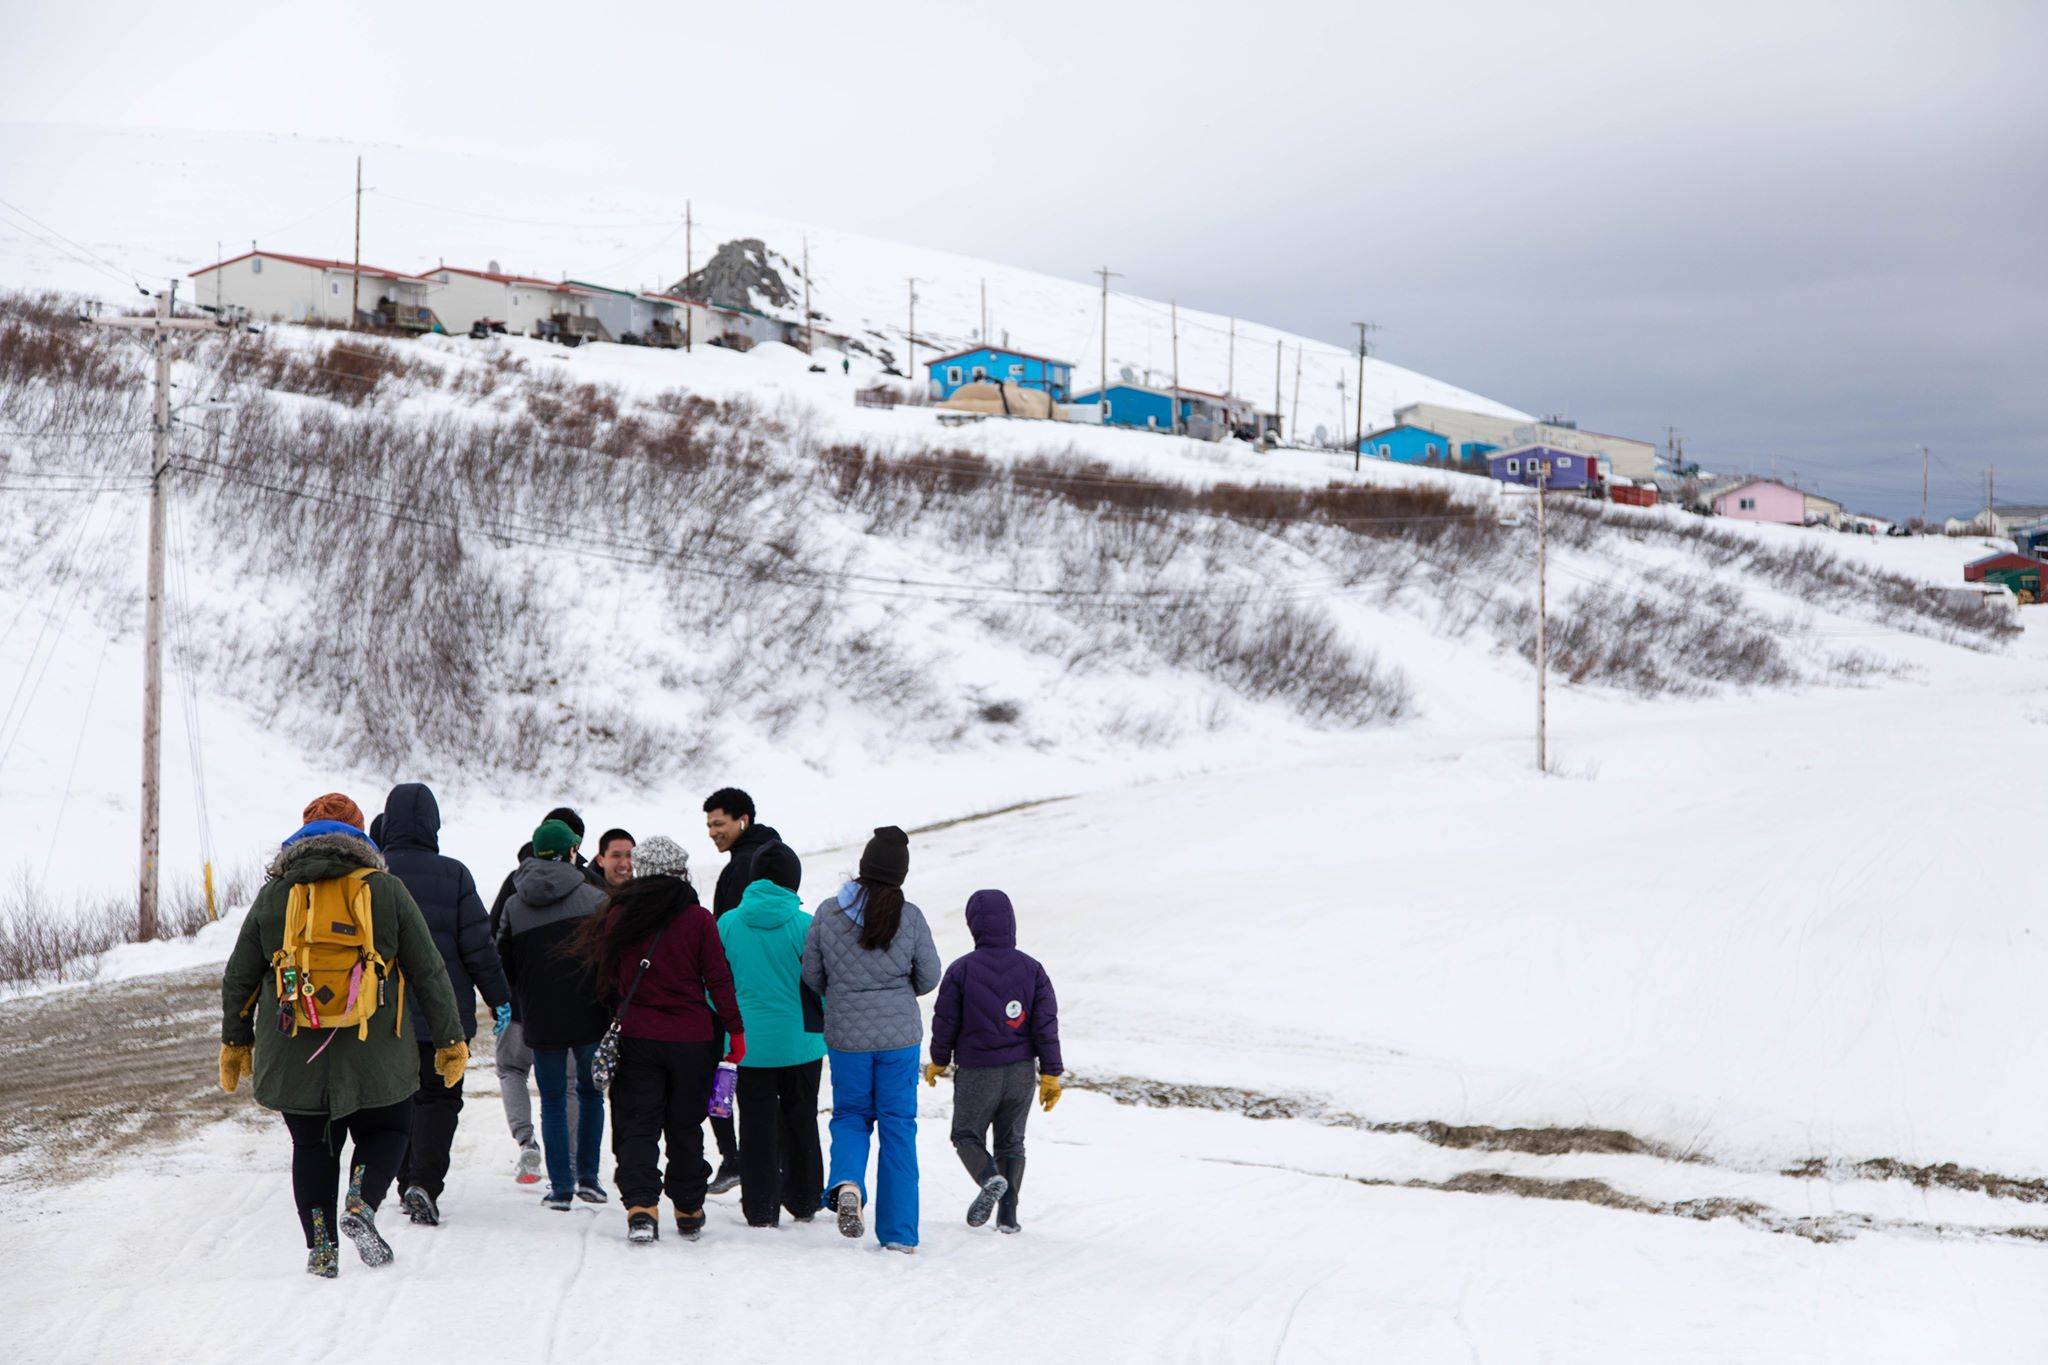 Photos by Erin Irwin / Education Week                                On the final day of the Scammon Bay trip, several students from Anchorage said their perceptions had changed. “I learned to not judge and assume a lot of things,” said sophomore Genavieve Beans.